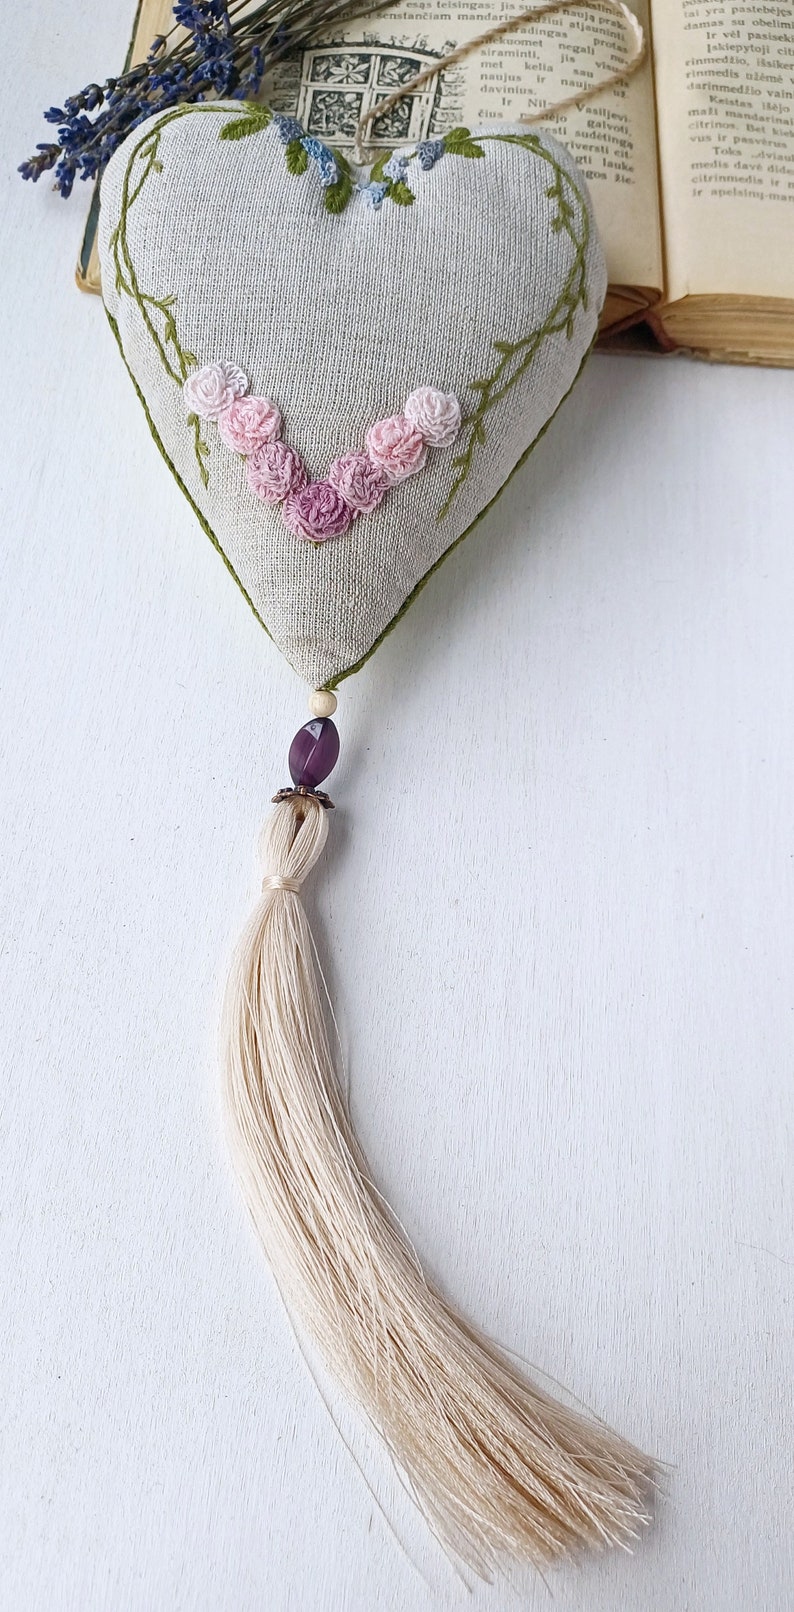 Hand embroidered linen sachet with tassel and hanging loop filled with lavender. Embroidered roses